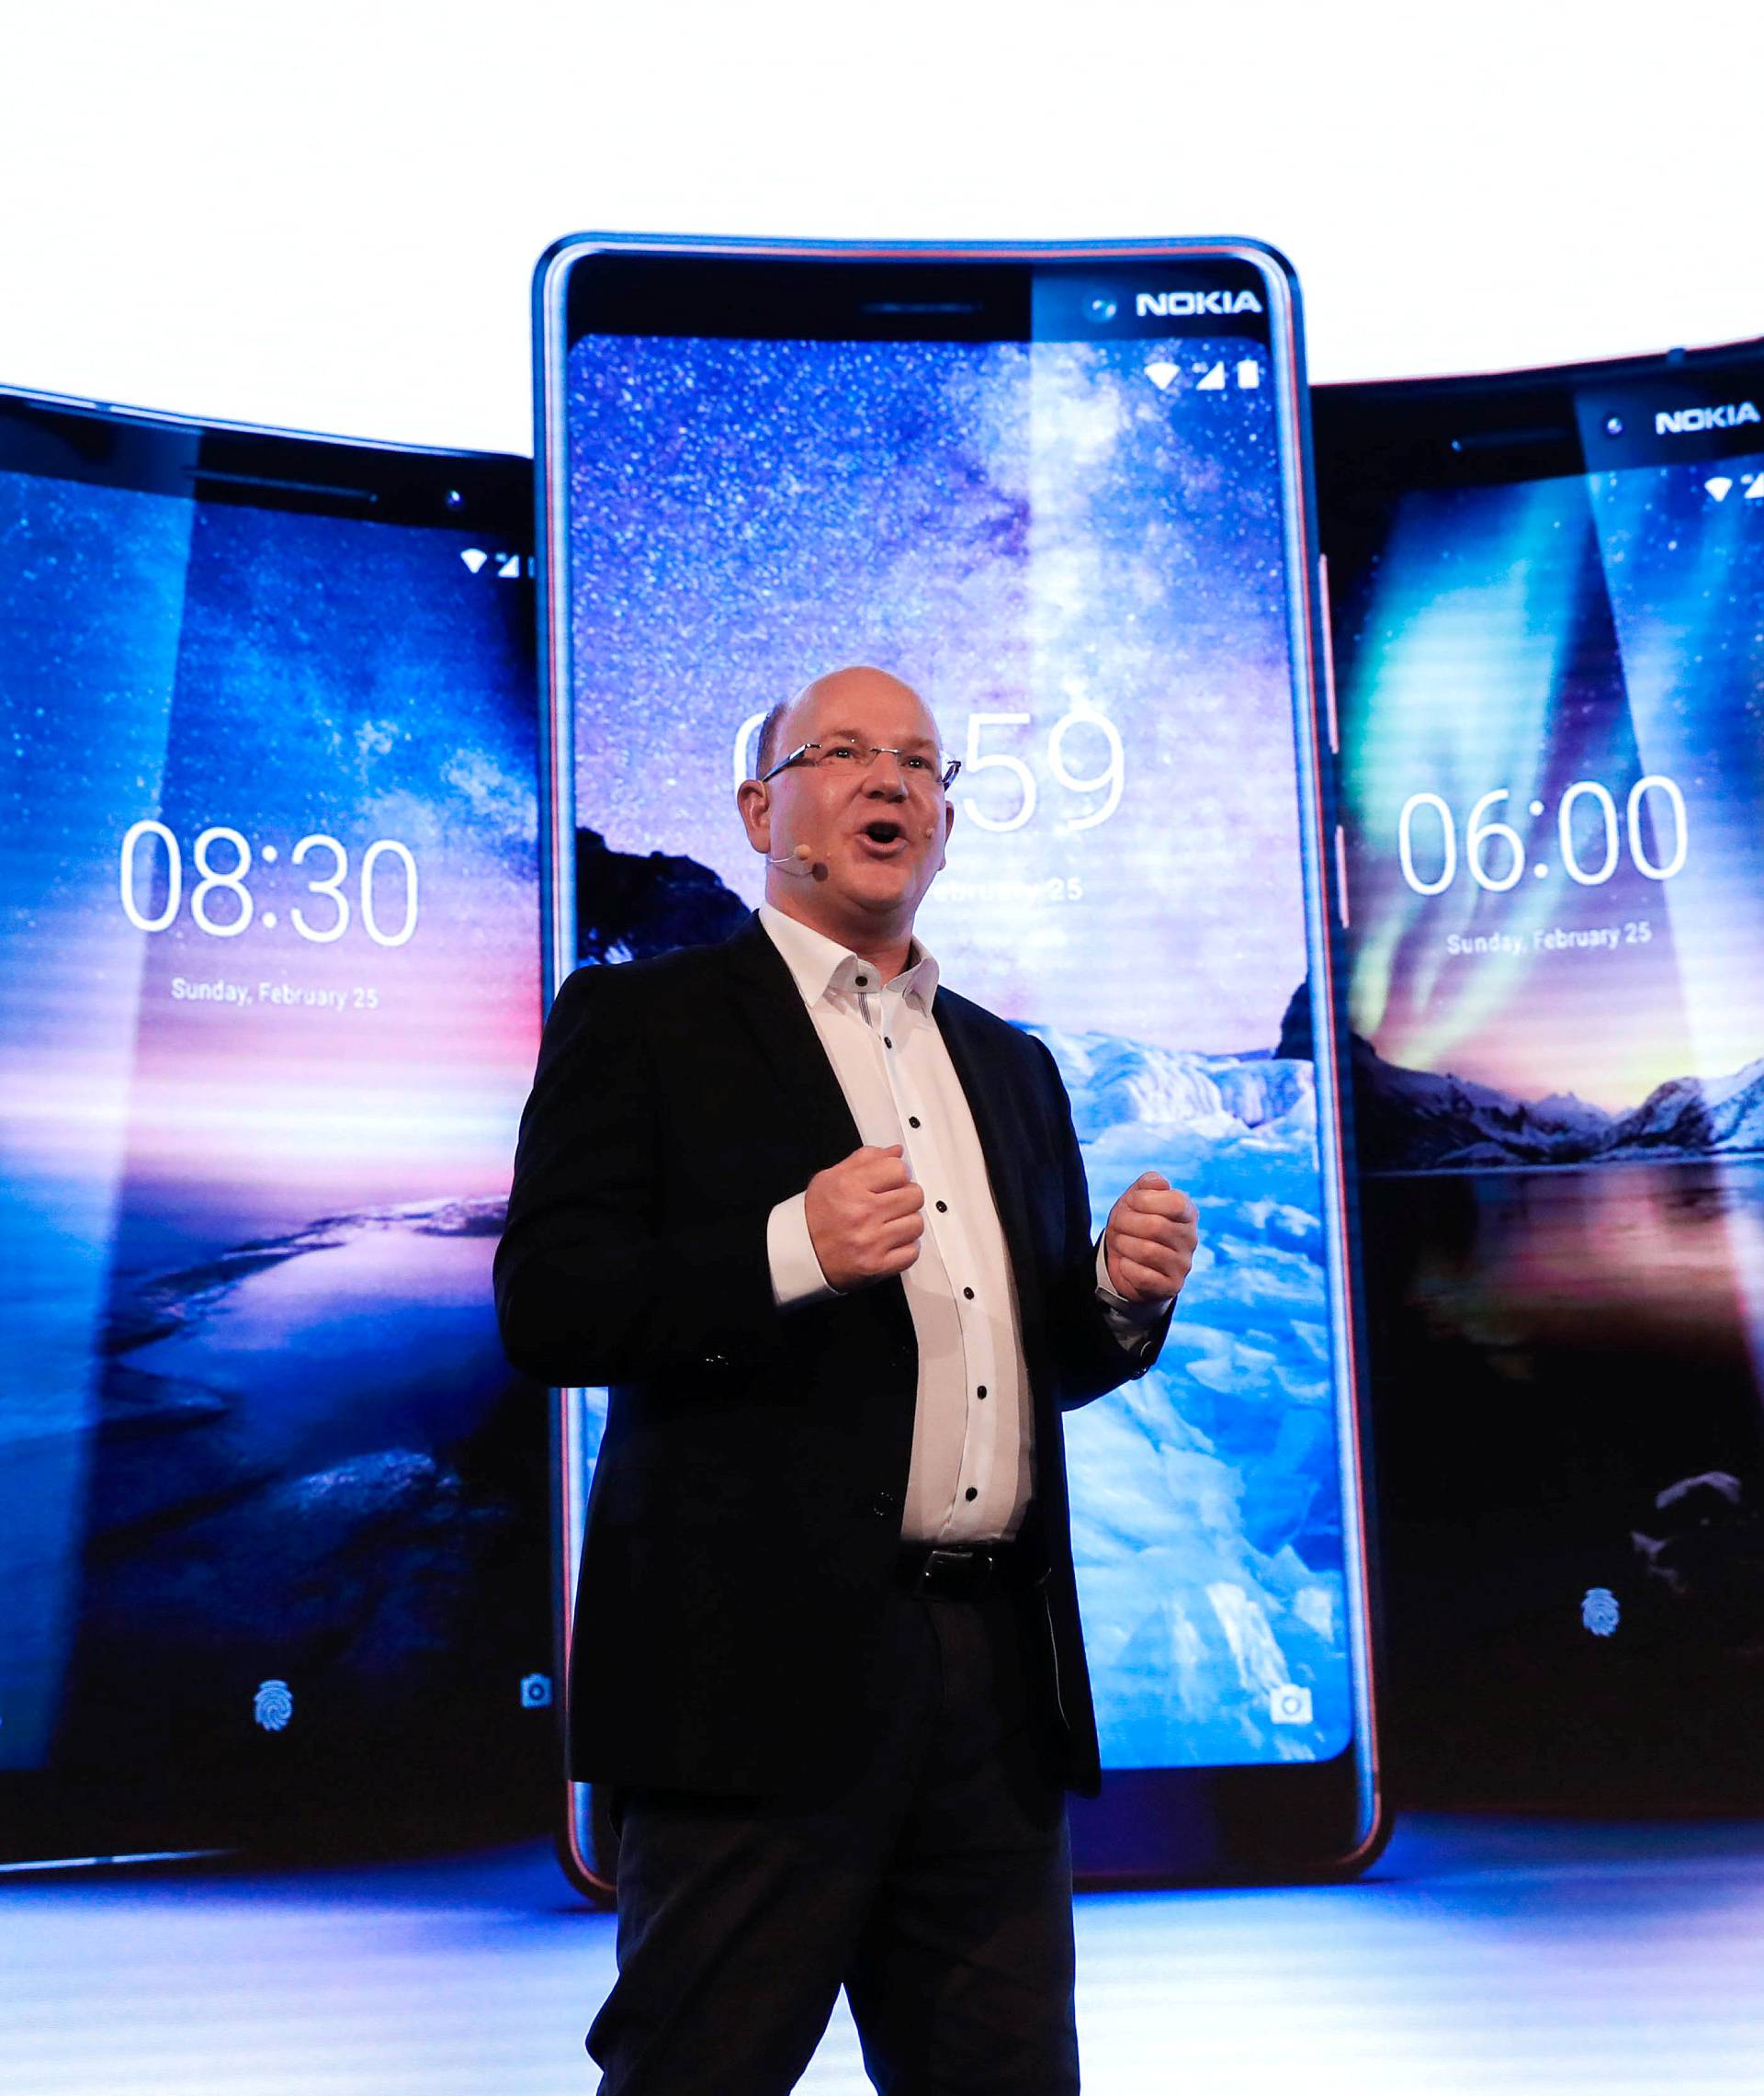 Chief Executive Officer of HMD Global Seiche presents new Nokia mobile devices during the Mobile World Congress in Barcelona